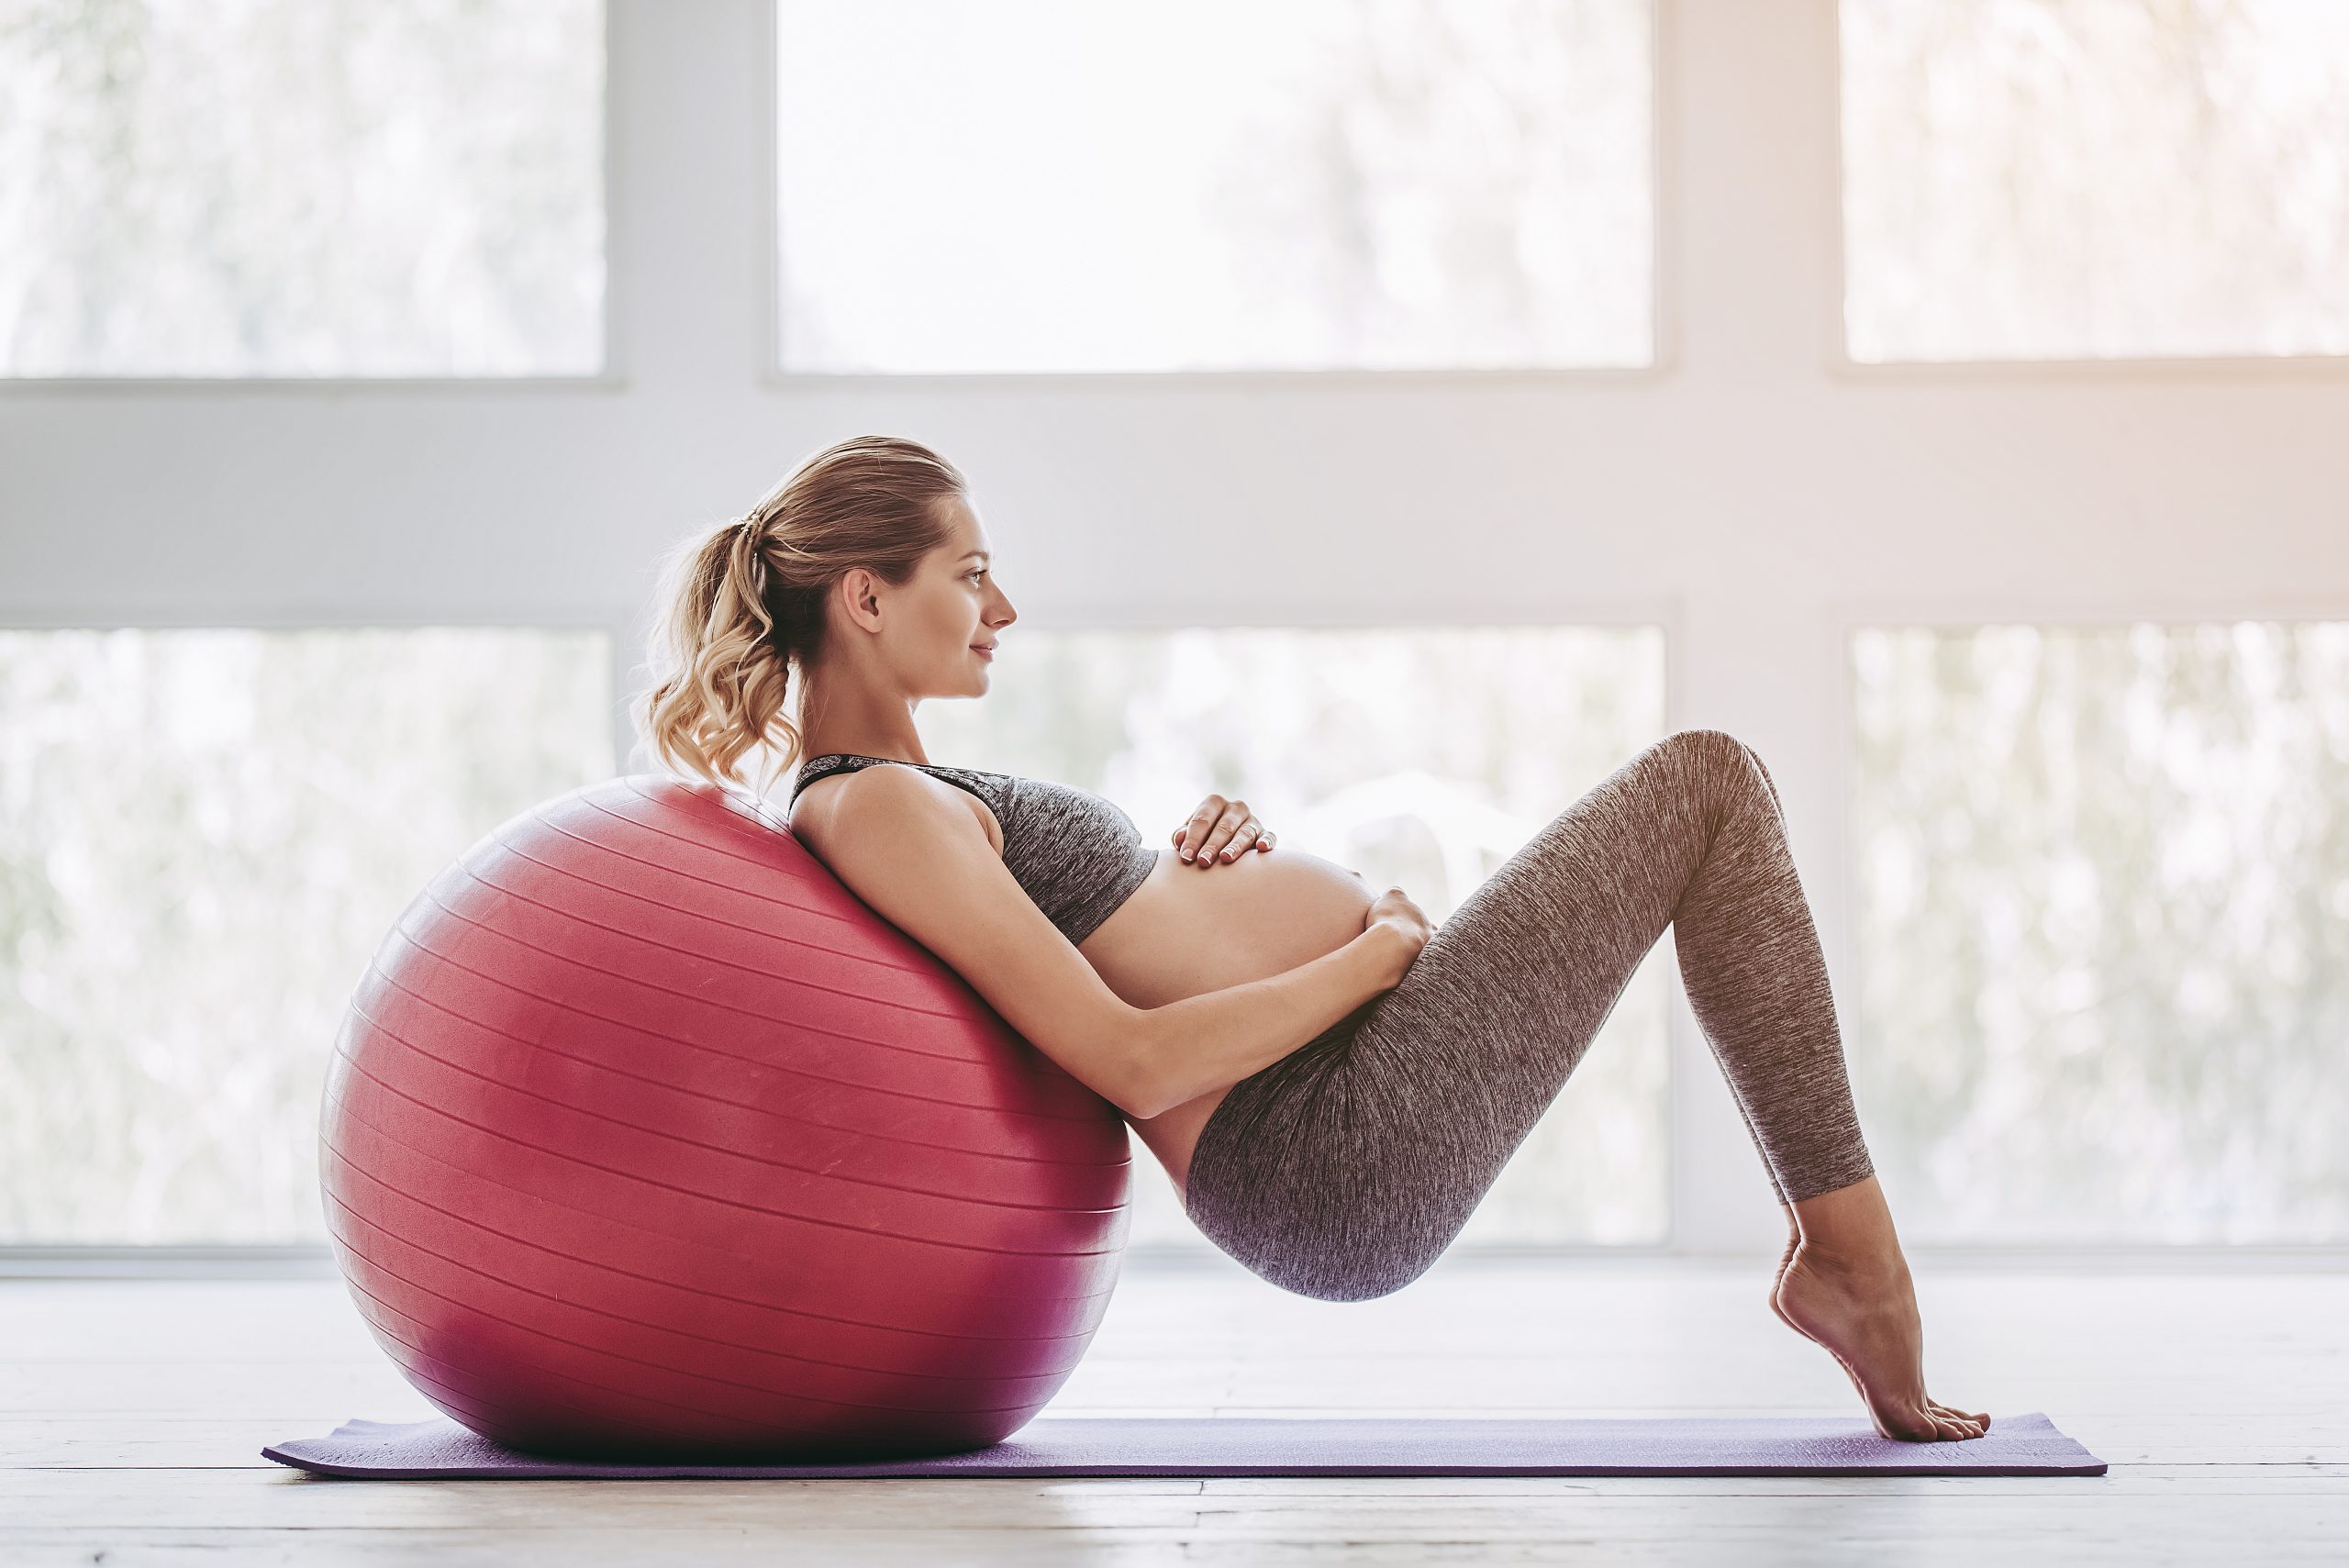 The Best Fitness Classes In London For Mums And Mums-To-Be